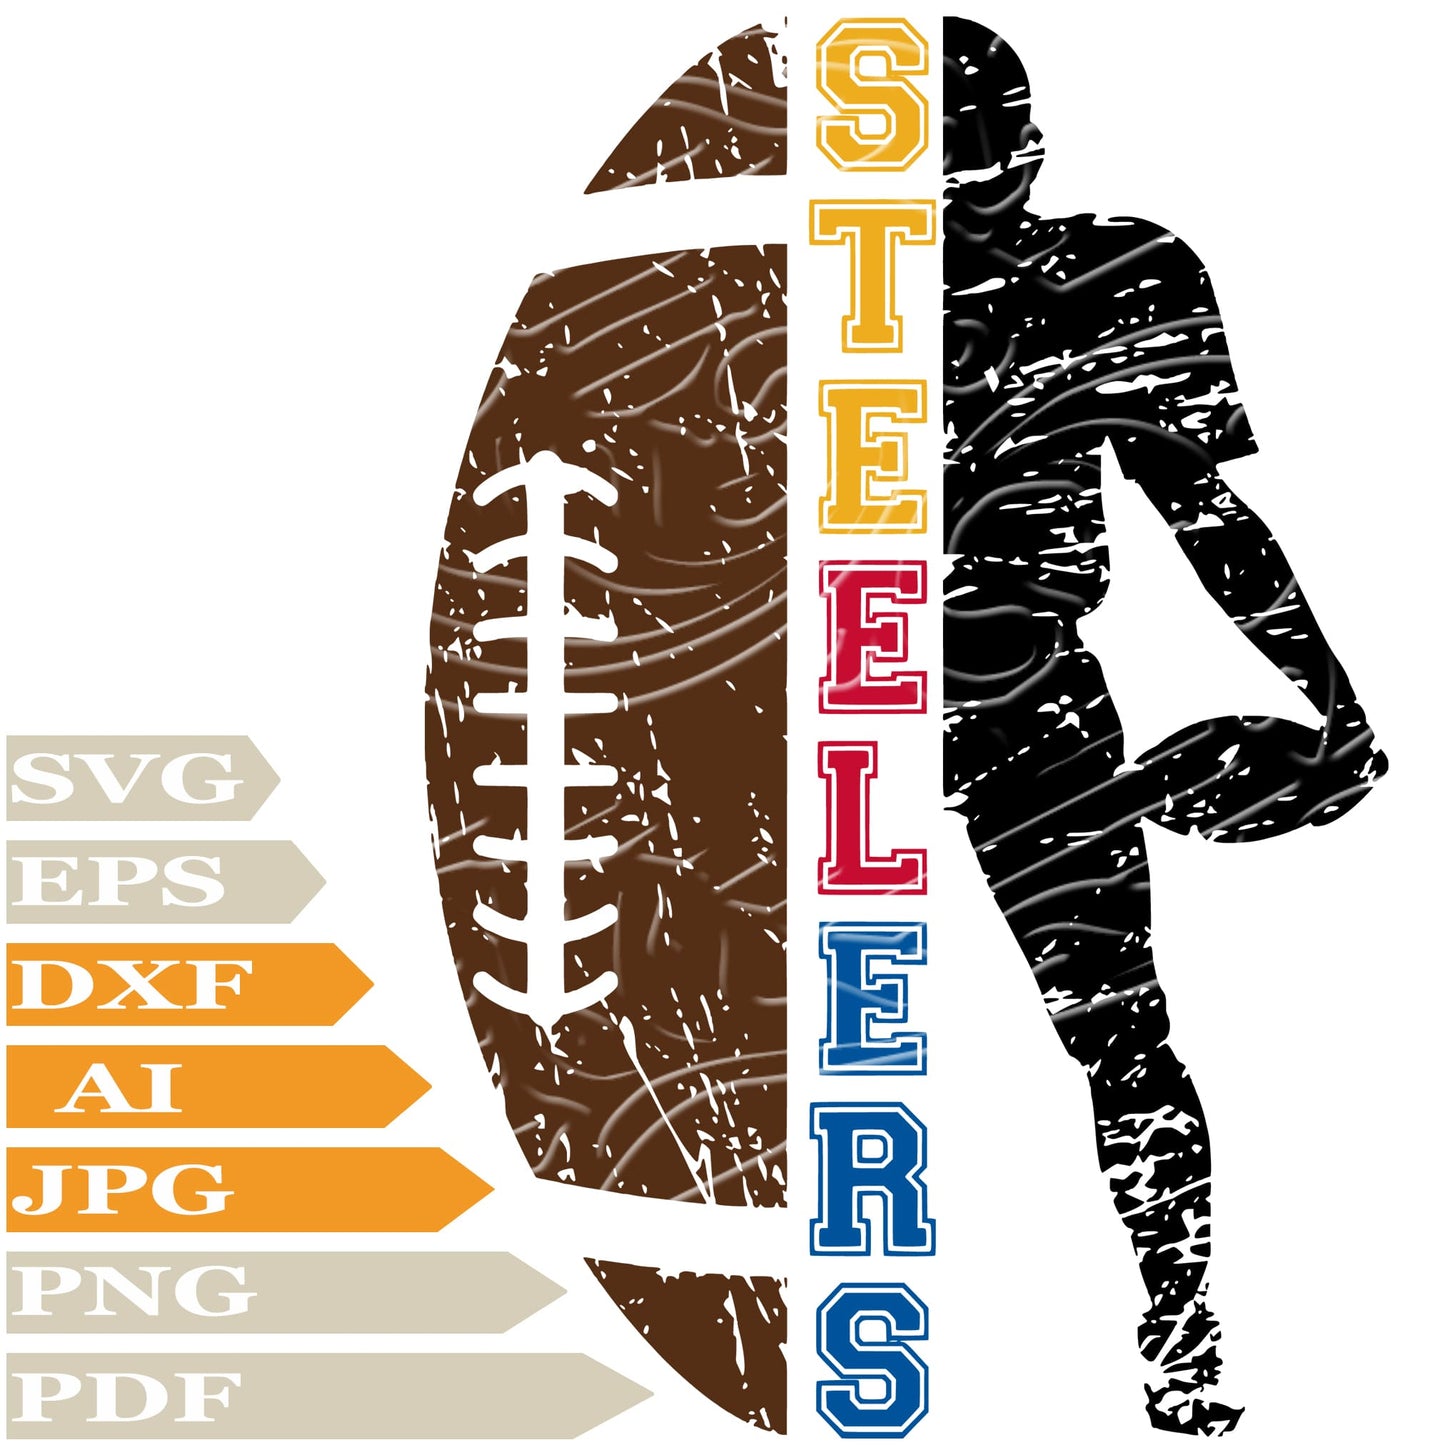 Steelers Football, Pittsburgh Steelers Logo Svg File, Image Cut, Png, For Tattoo, Silhouette, Digital Vector Download, Cut File, Clipart, For Cricut